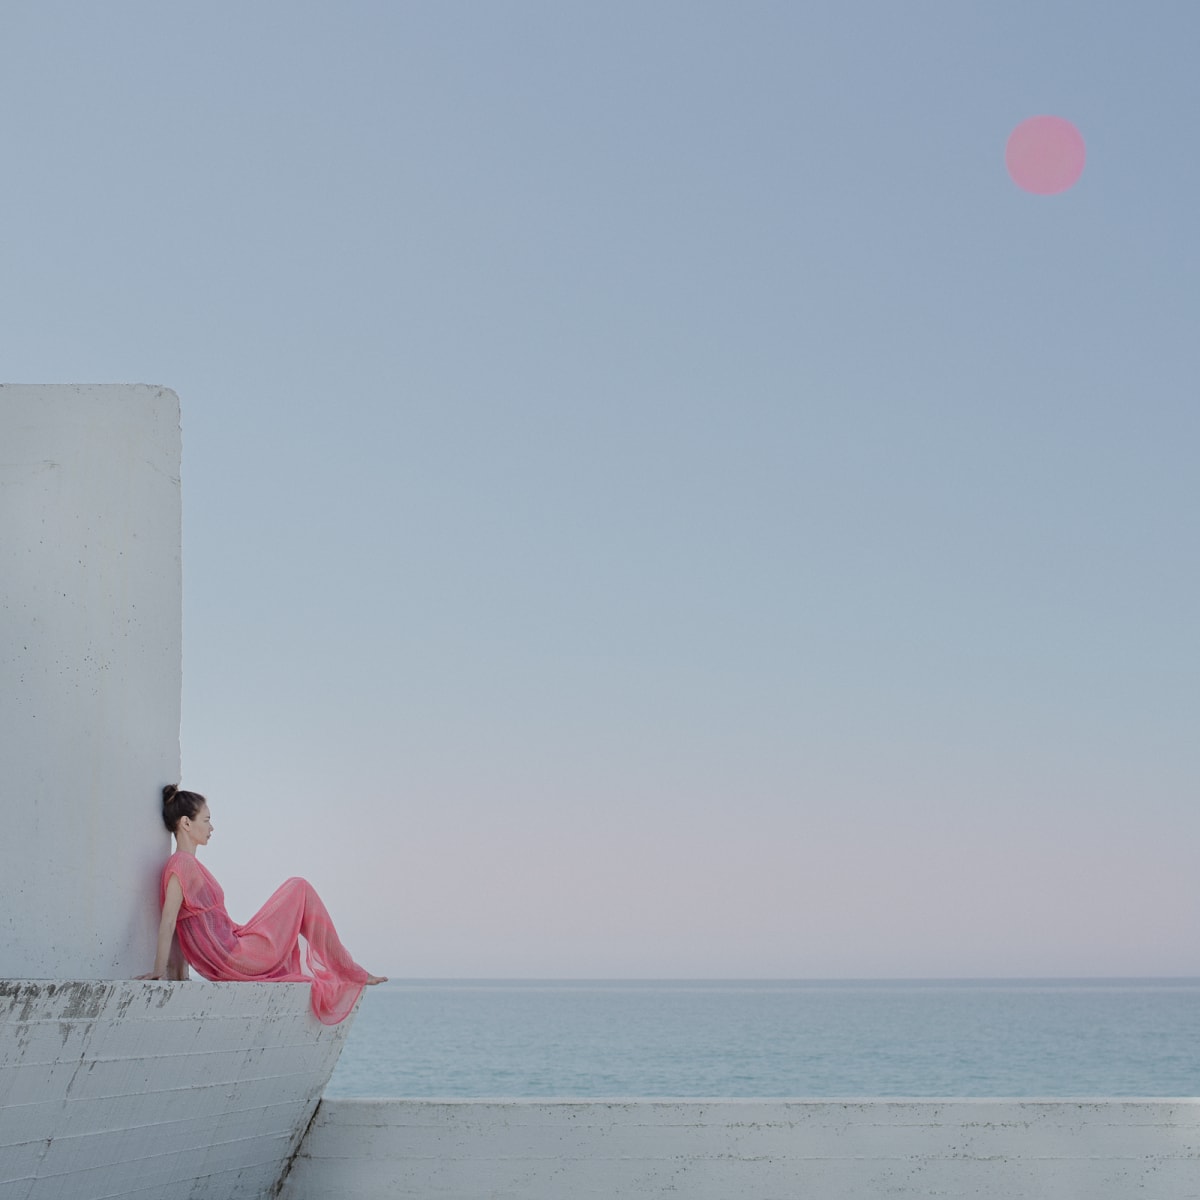 Sun In Pink by Dasha Pears  Image: Mellow, mild, melting, and melodic. Enjoy the marvelous view while meditating. 